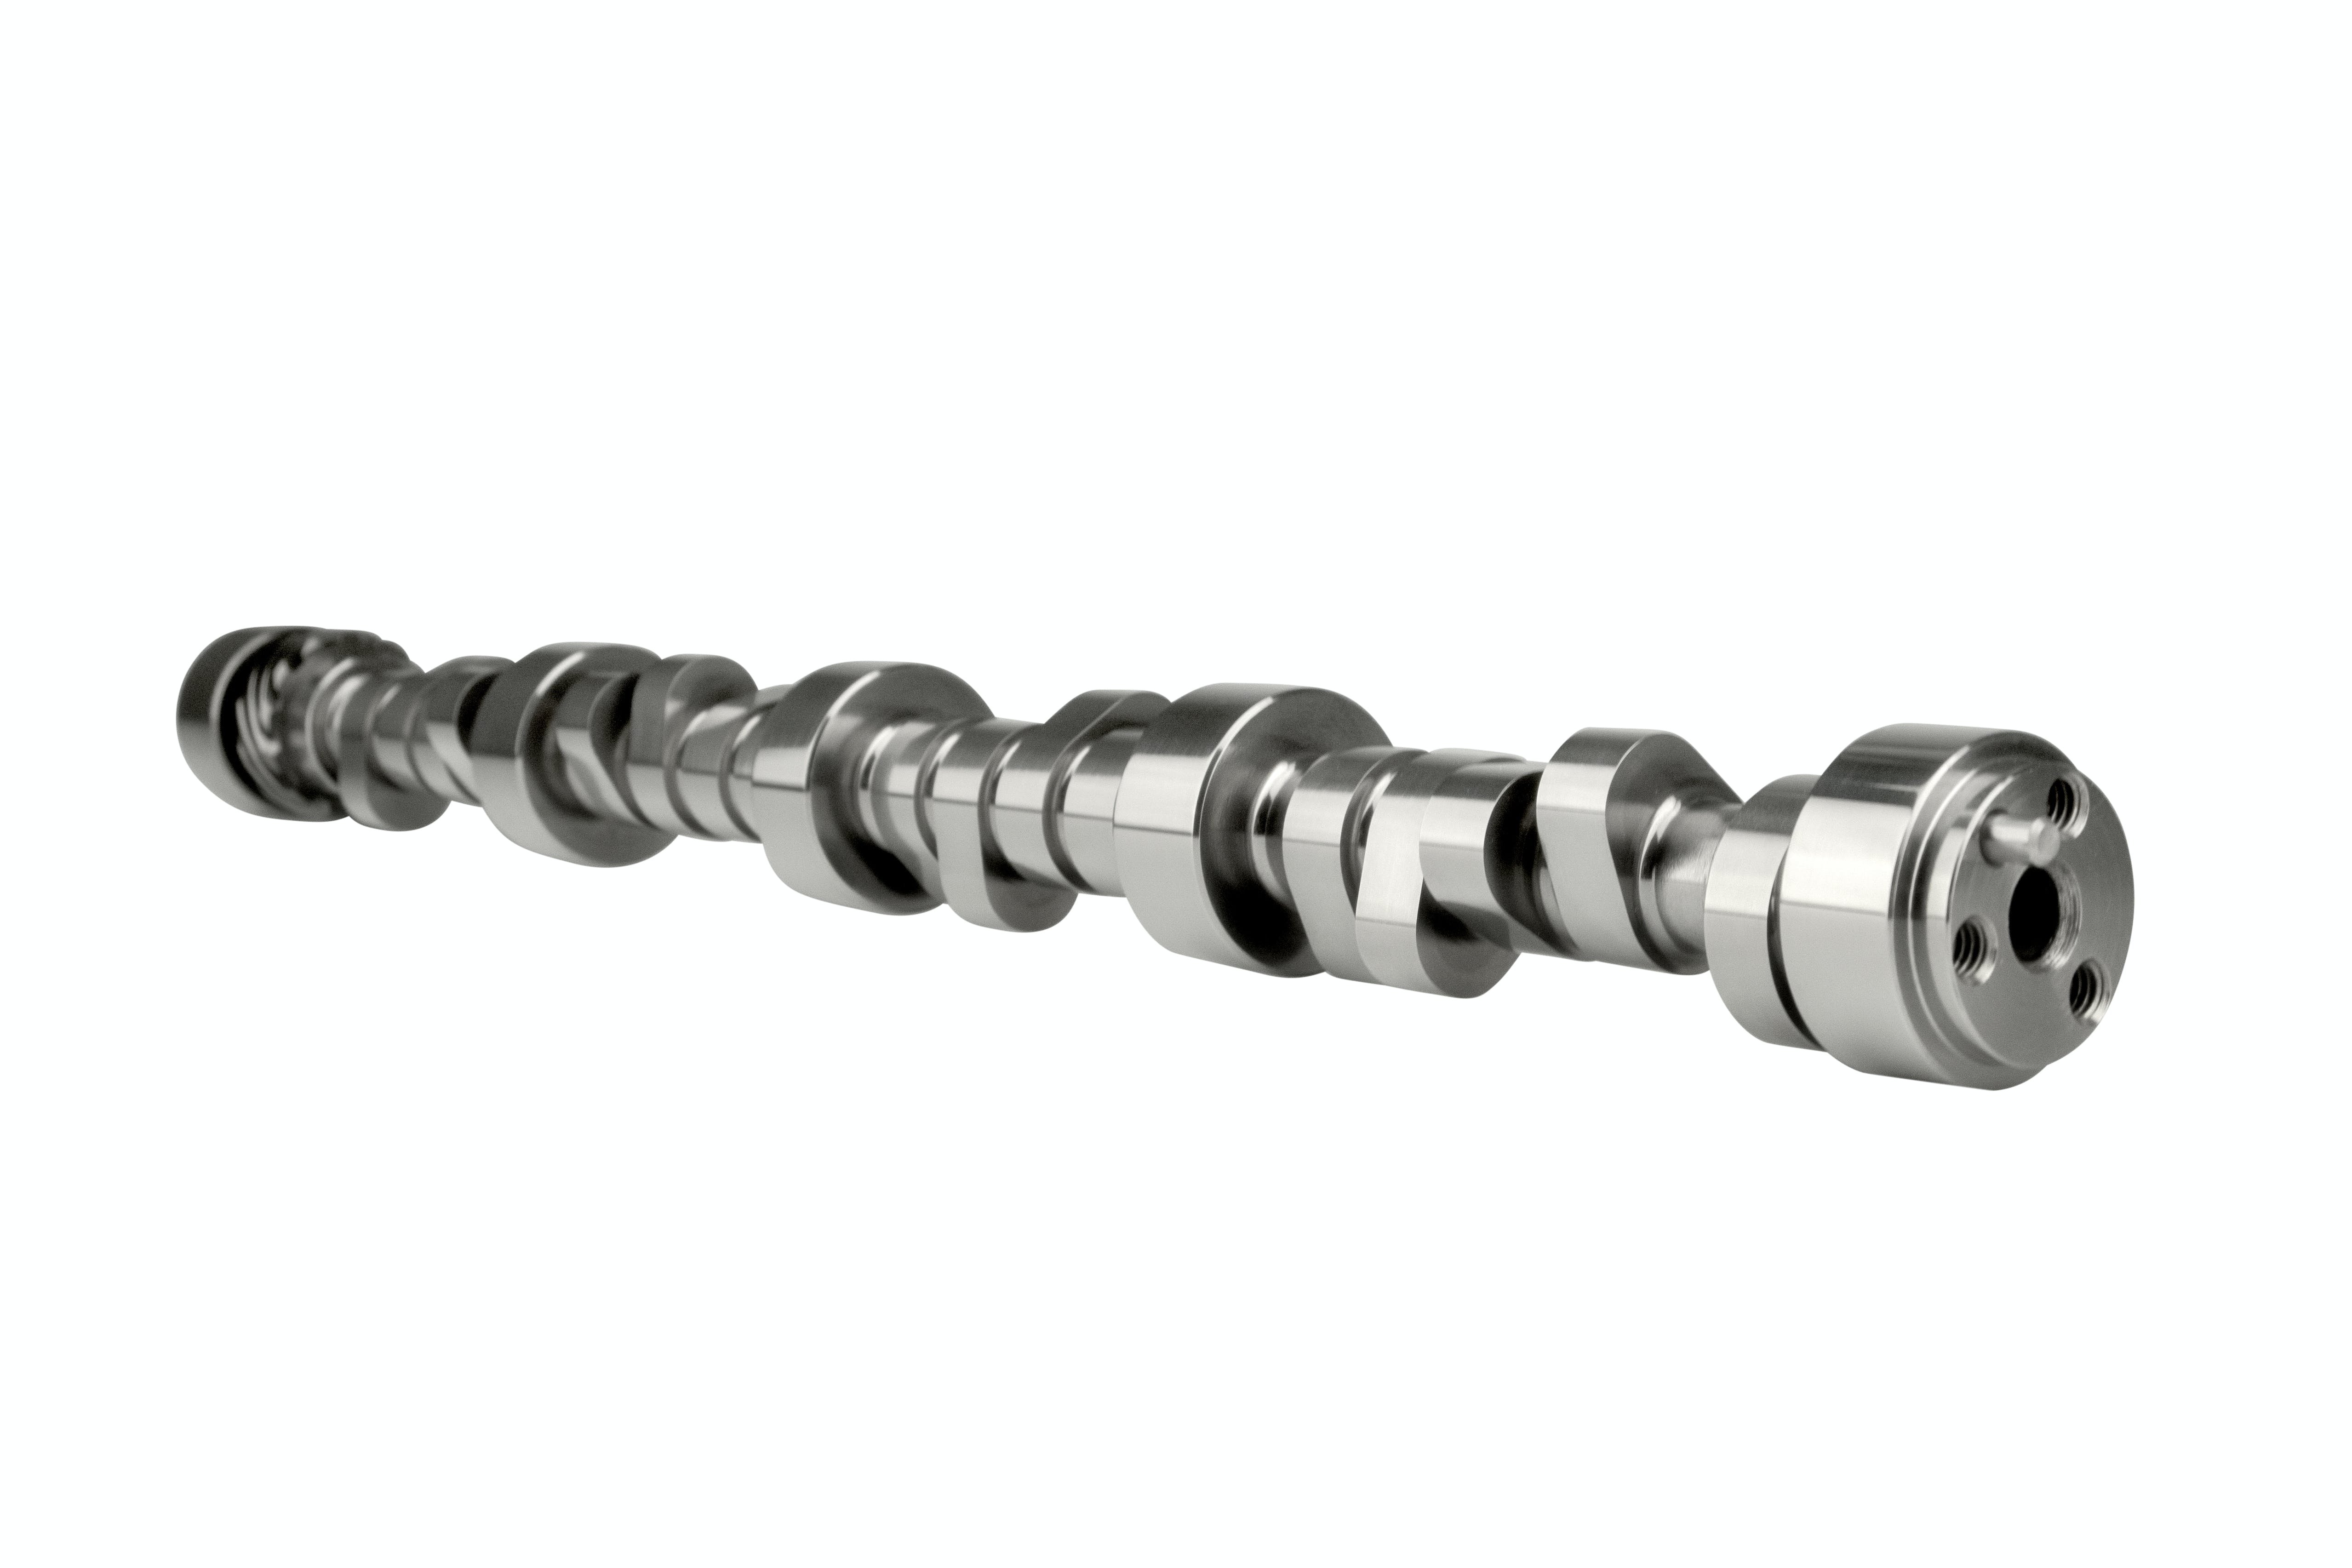 Competition Cams 08-696-11 Hustler 603/604 Crate Engine Hydraulic Roller Stage 1 Camshaft